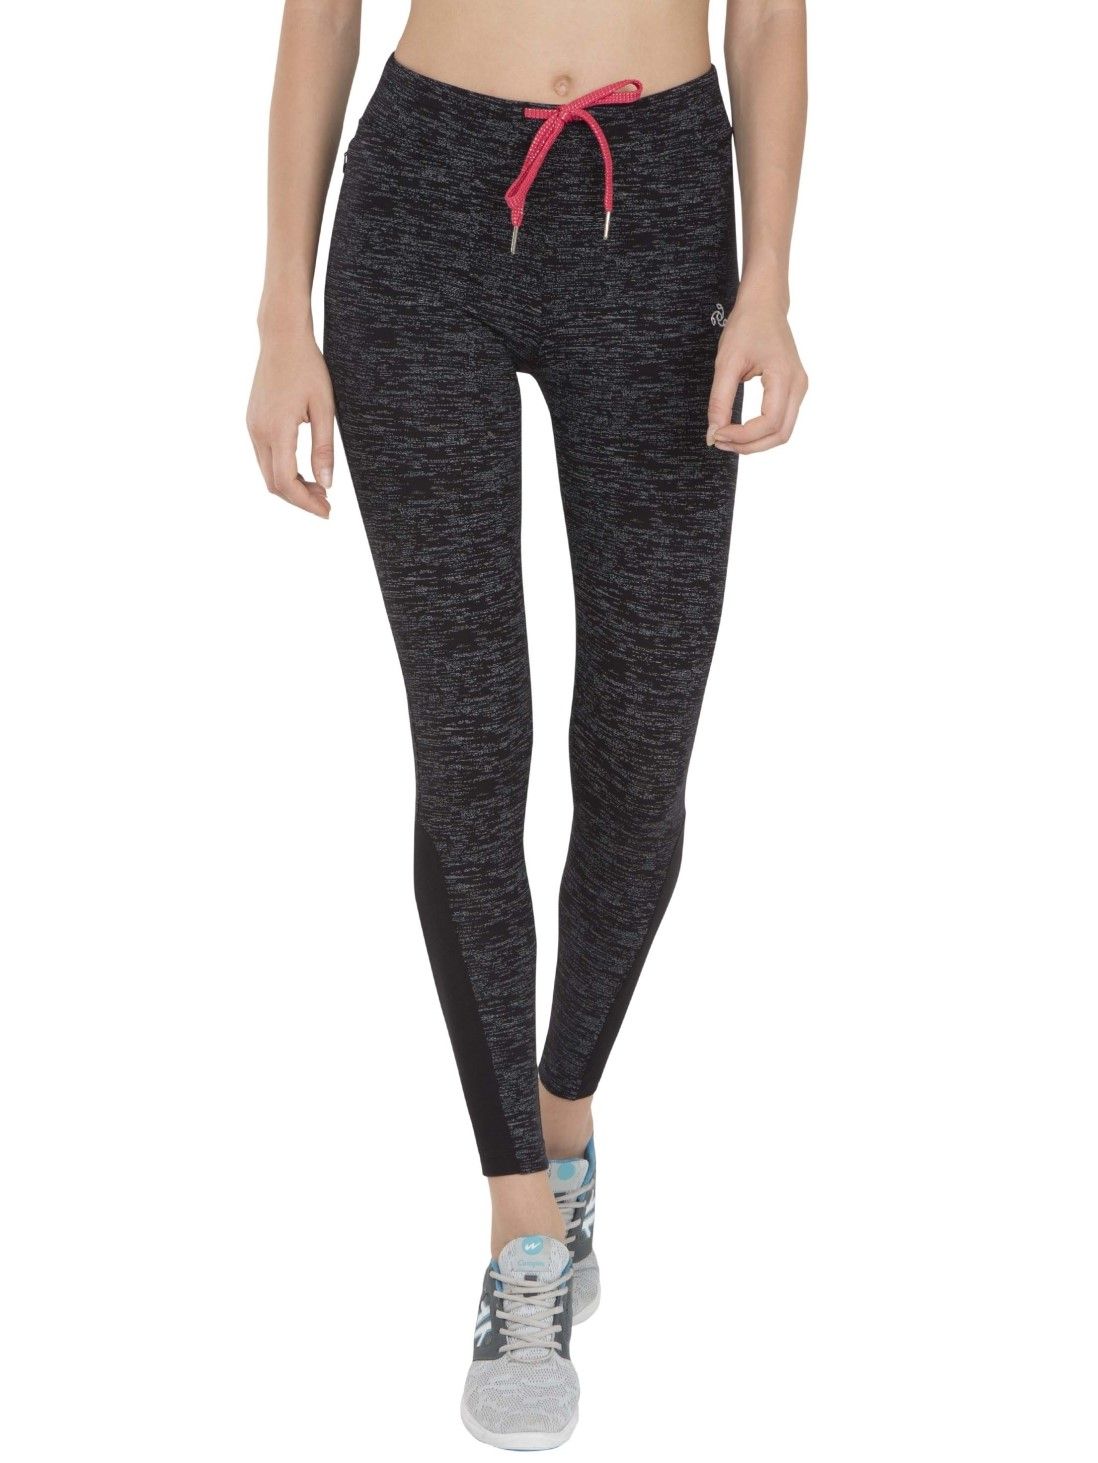 Best Yoga Pants For Women in India